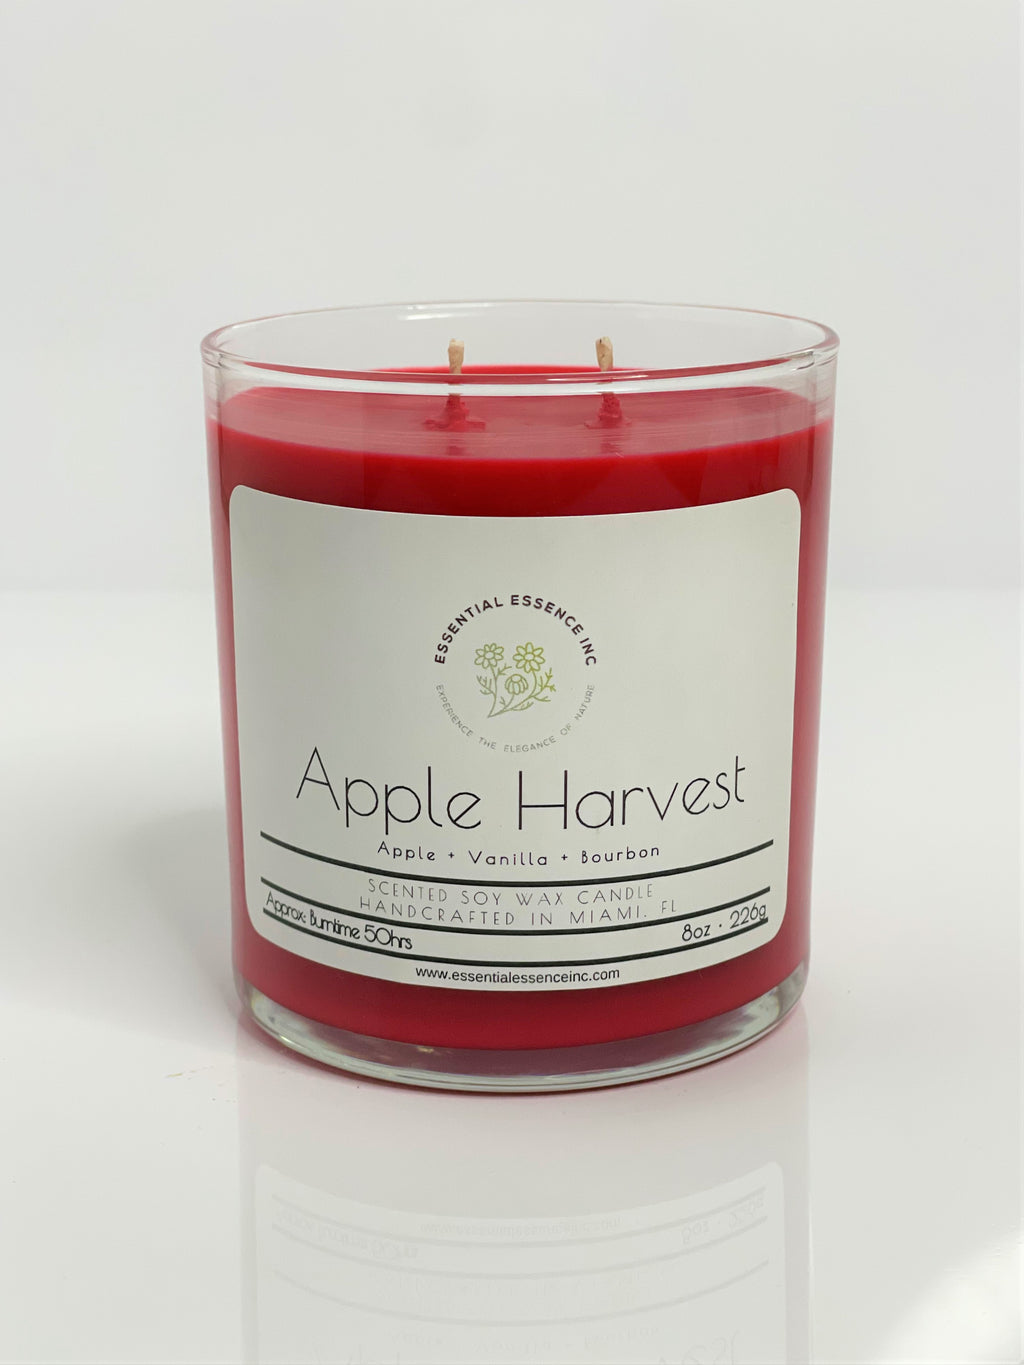 Find yourself transported to lush apple orchards laden with sweet, juicy apples ready for picking with this scented candle. The Apple Harvest is a comforting, nostalgic scent that blends crisp, fragrant apples with a little touch of sweet vanilla to fill your senses with a warm, festive feeling. With base notes of deep, spicy bourbon, this fresh, fruity scent reaches elevated levels of sophistication, making it a holiday favorite that you and your family will adore.